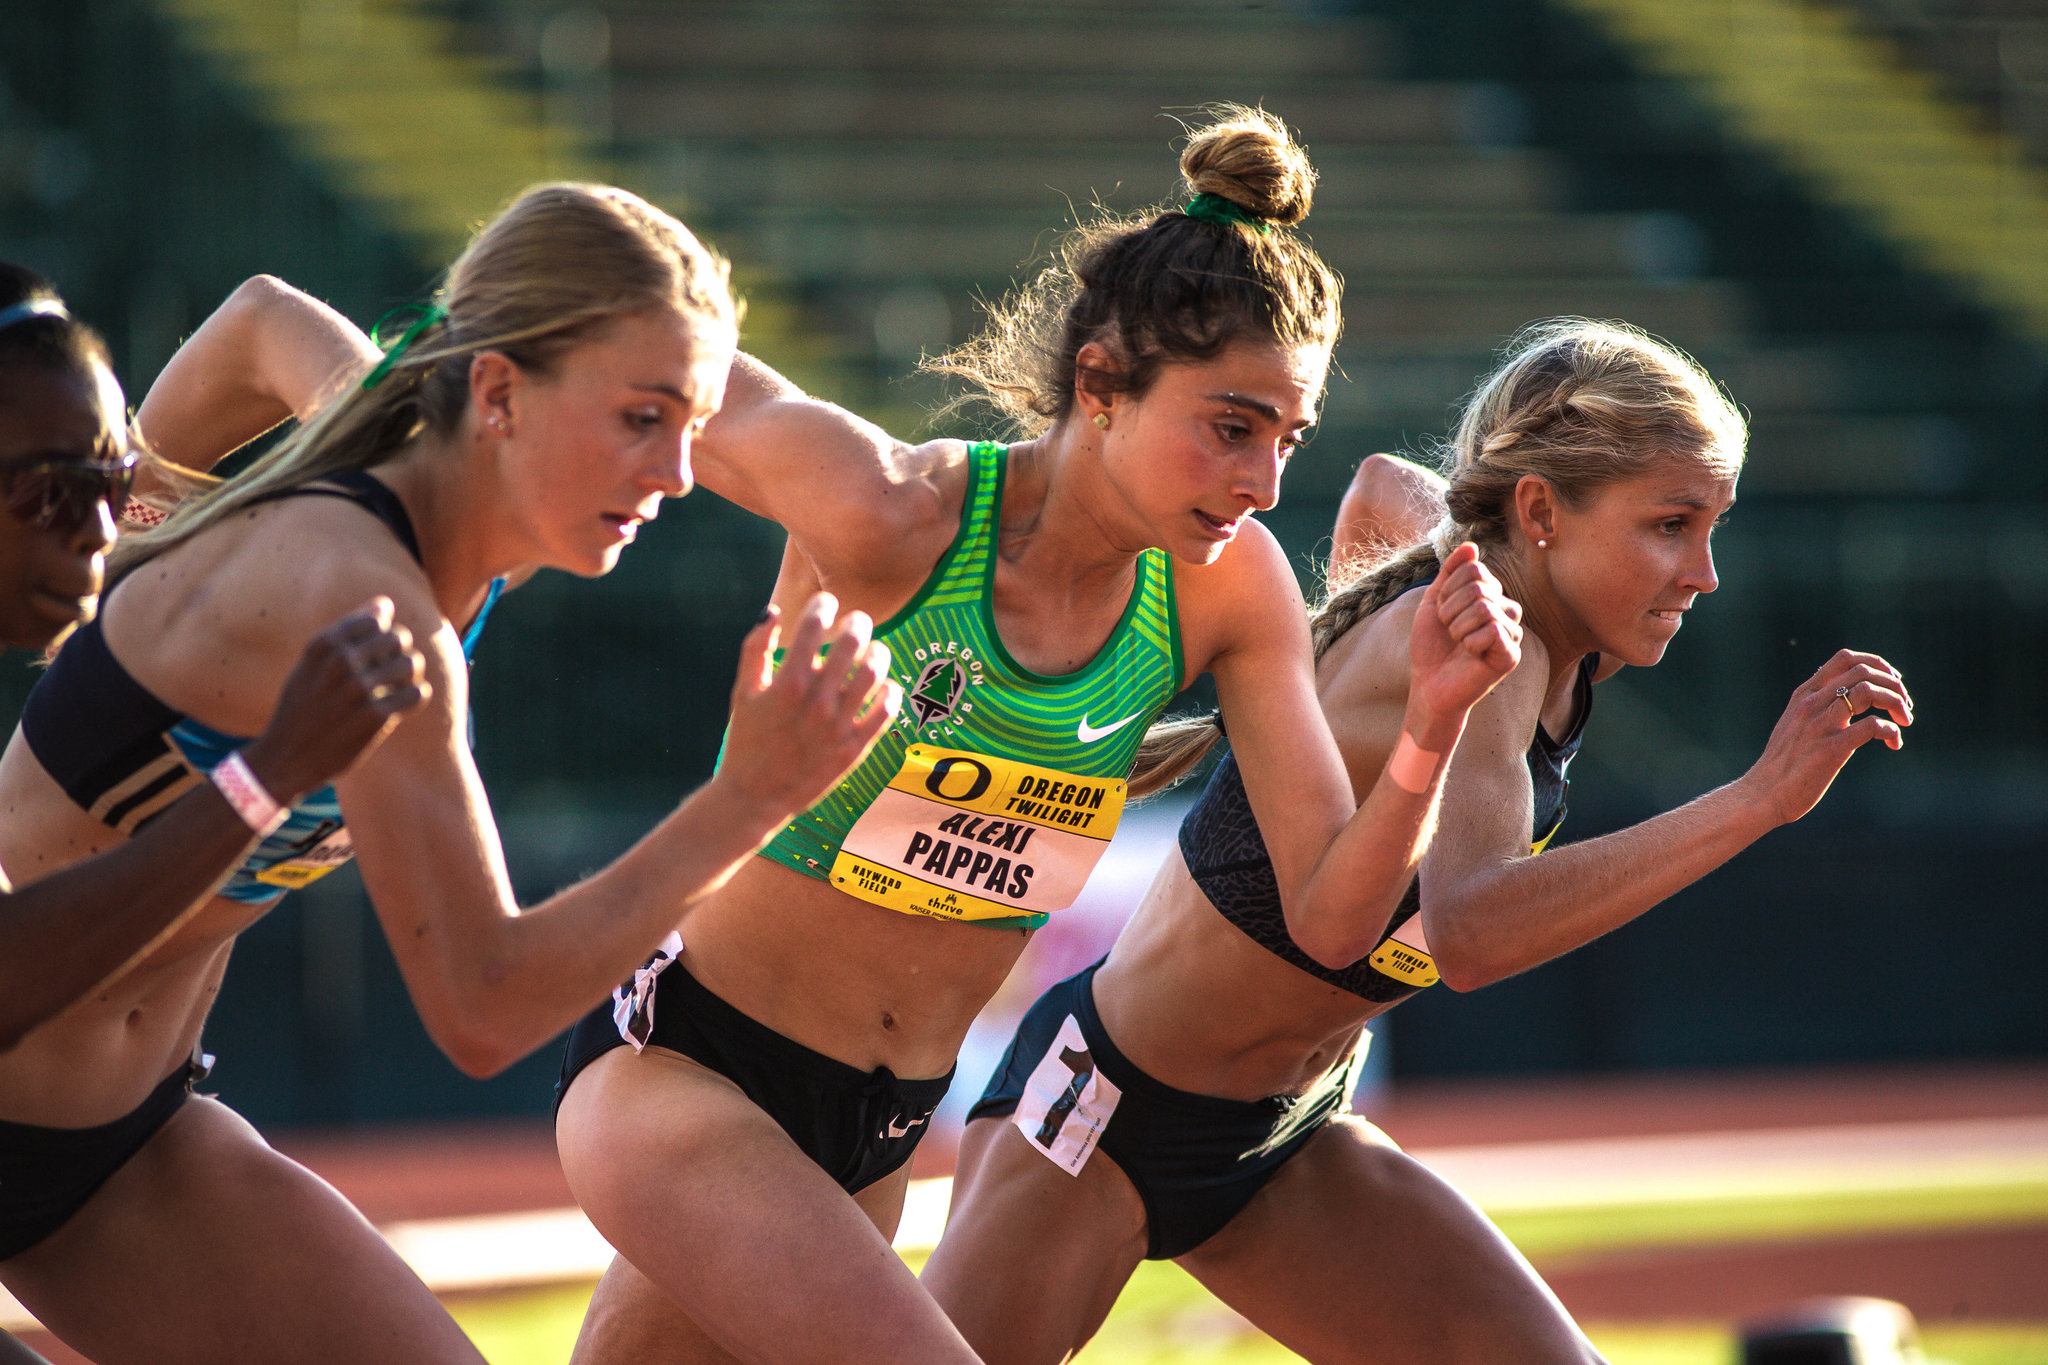 Alexi Pappas, runner/nytimes